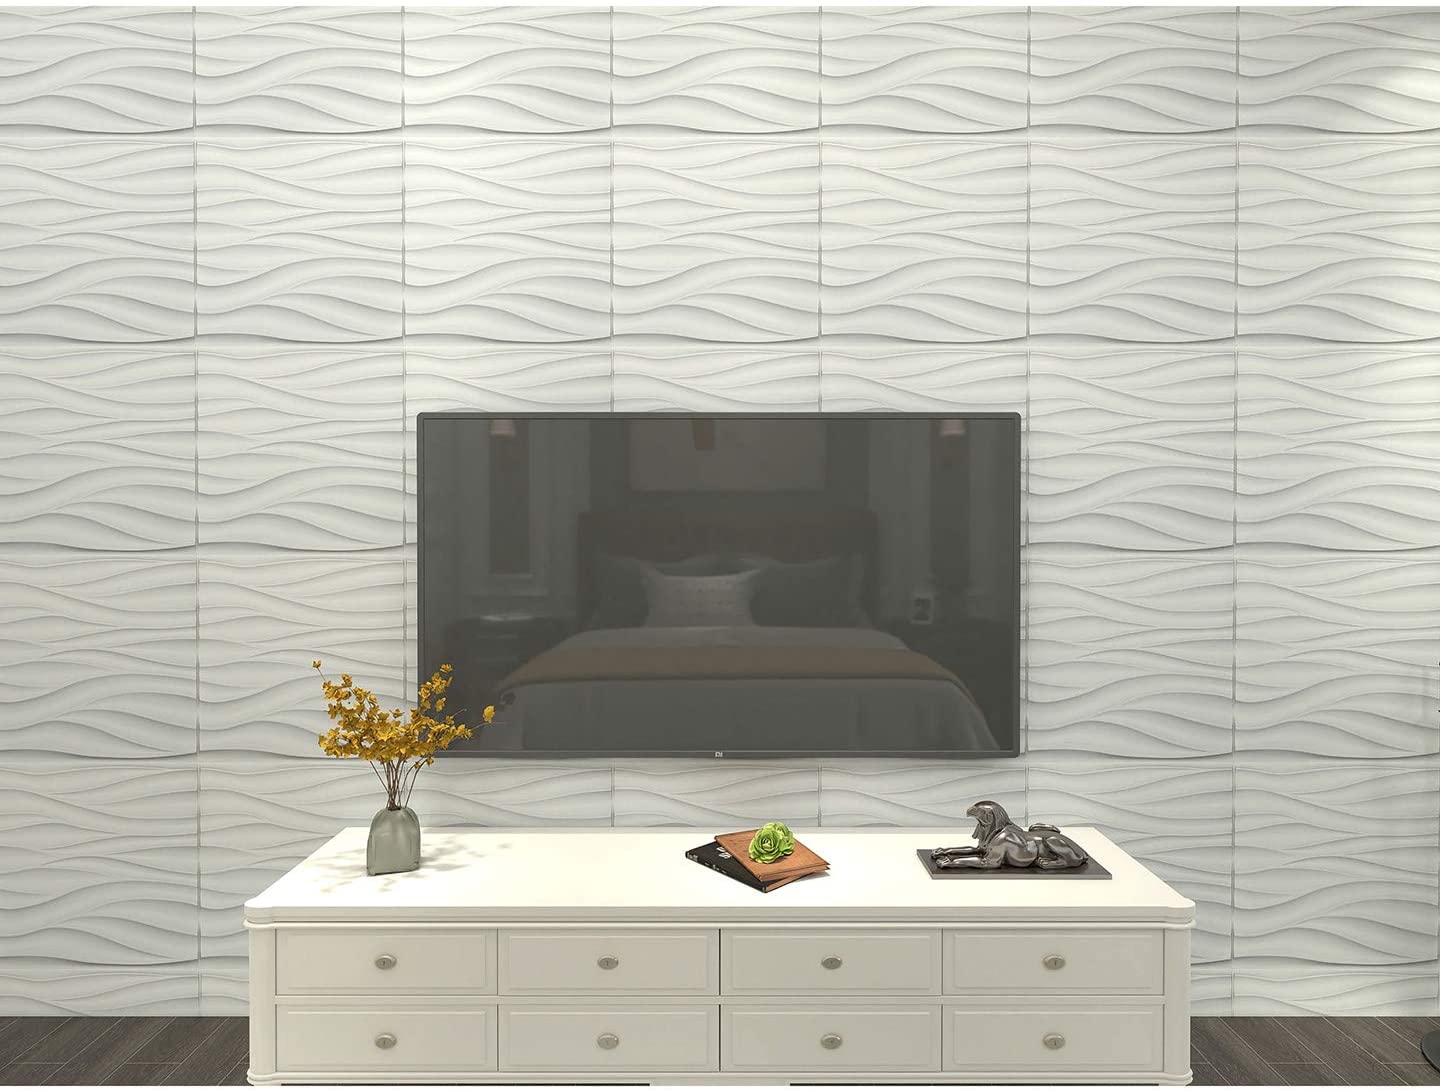 Pack Of 12 Wave Pattern Wall Panels 3d Textured Wall Tiles 3229 Sqft